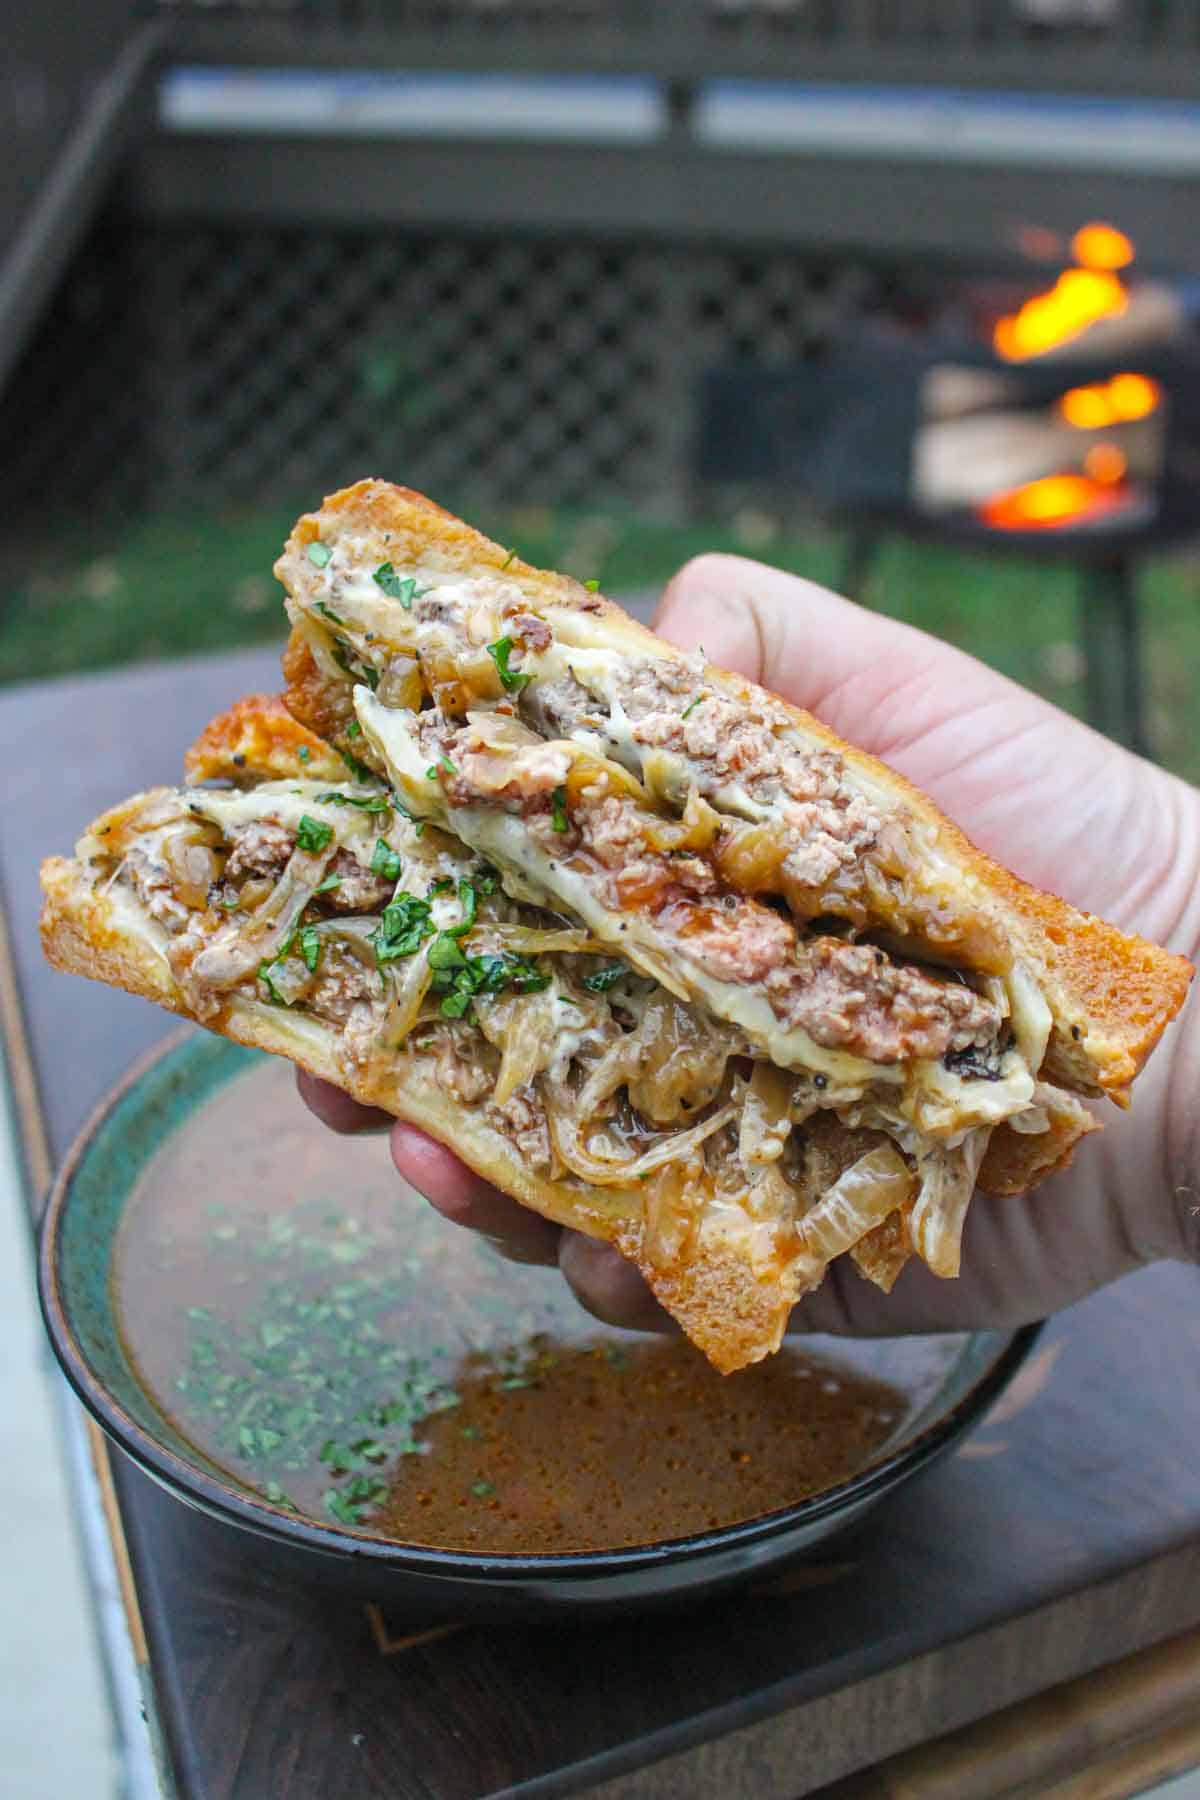 A juicy patty melt with caramelized onions sliced in half.